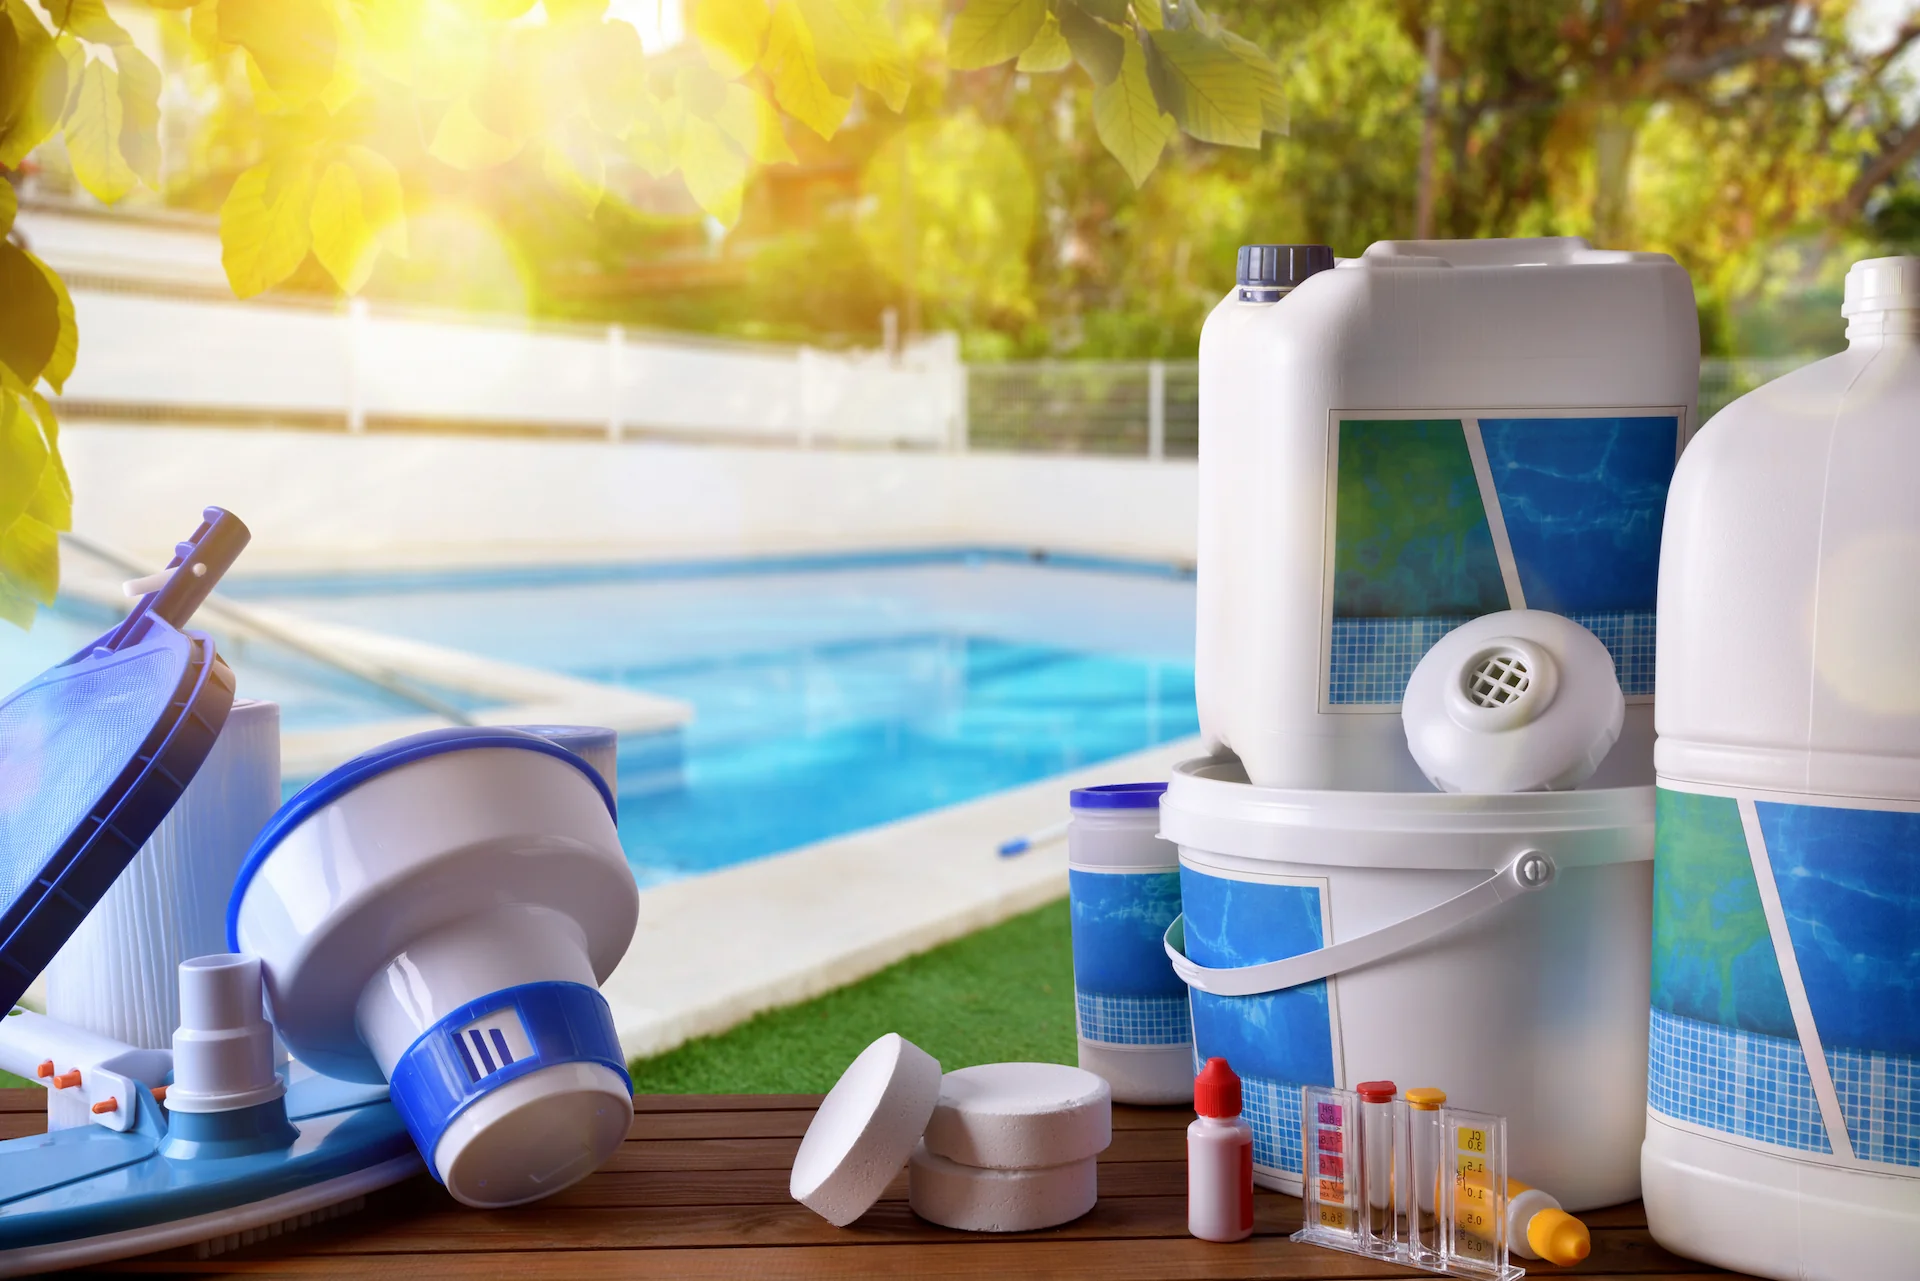 A variety of pool products, including chlorine tablets, liquid chemicals, and a leaf skimmer, are gathered on the deck of an inground pool.